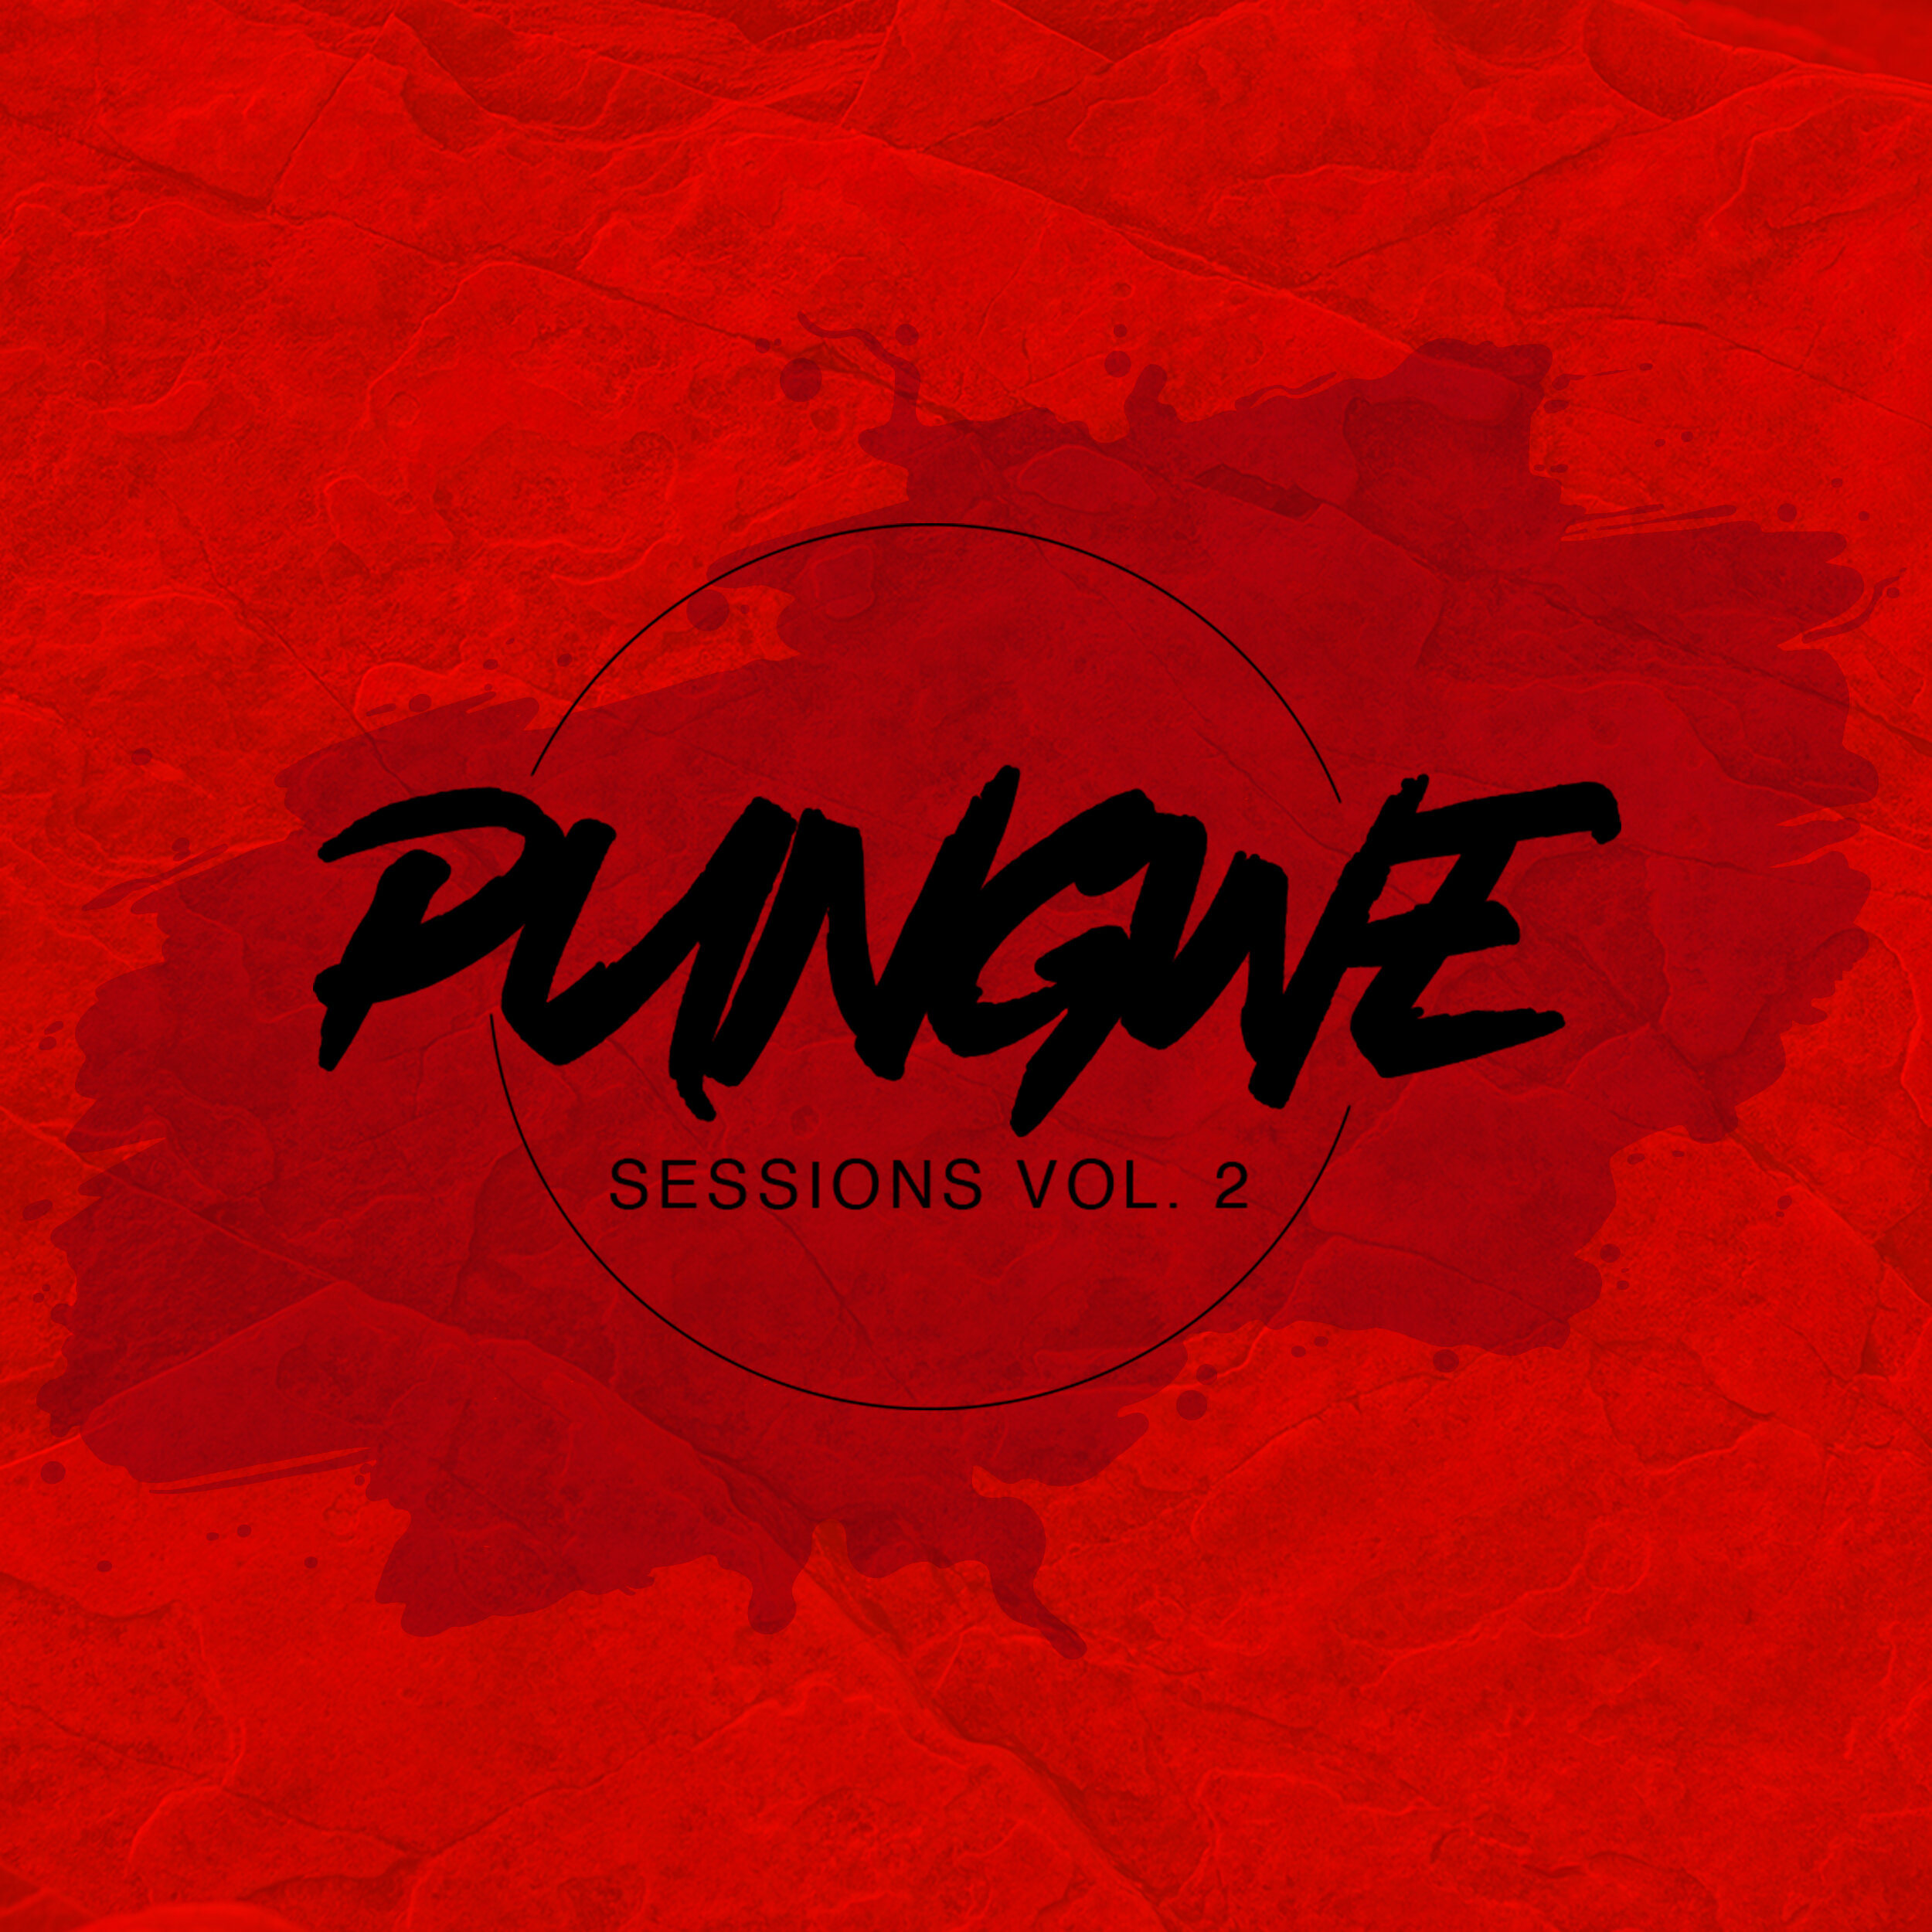 Pungwe Sessions Vol II Album Front Cover.jpg